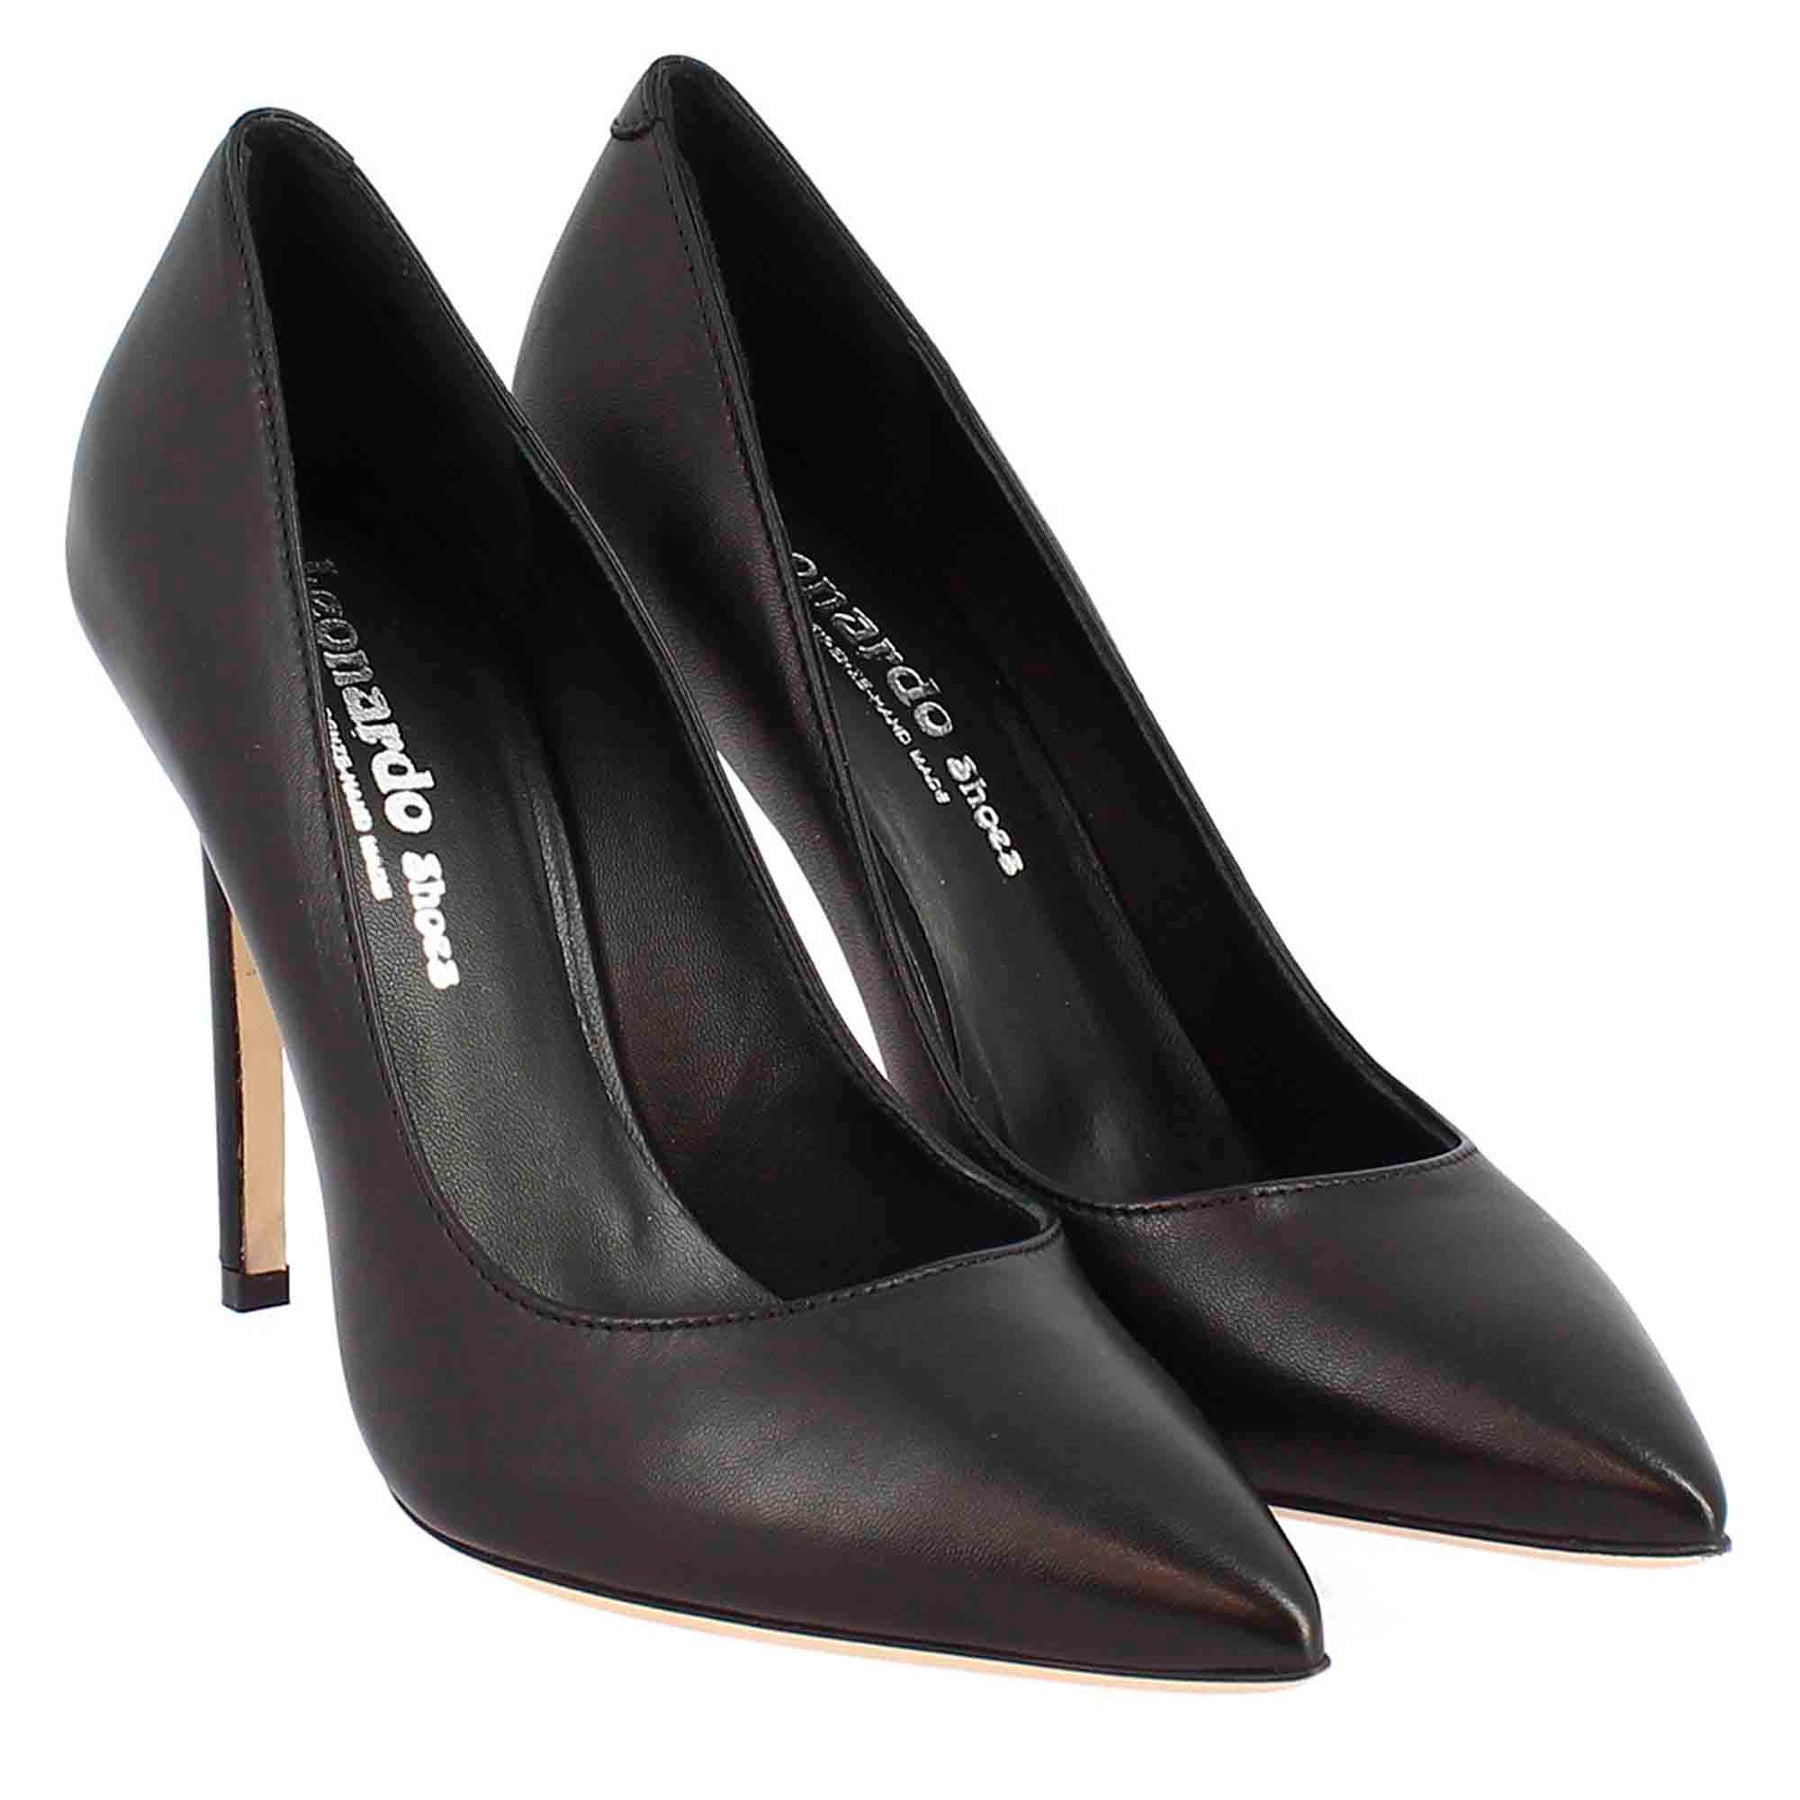 HEELED SHOES WITH ANKLE STRAP - Black | ZARA India